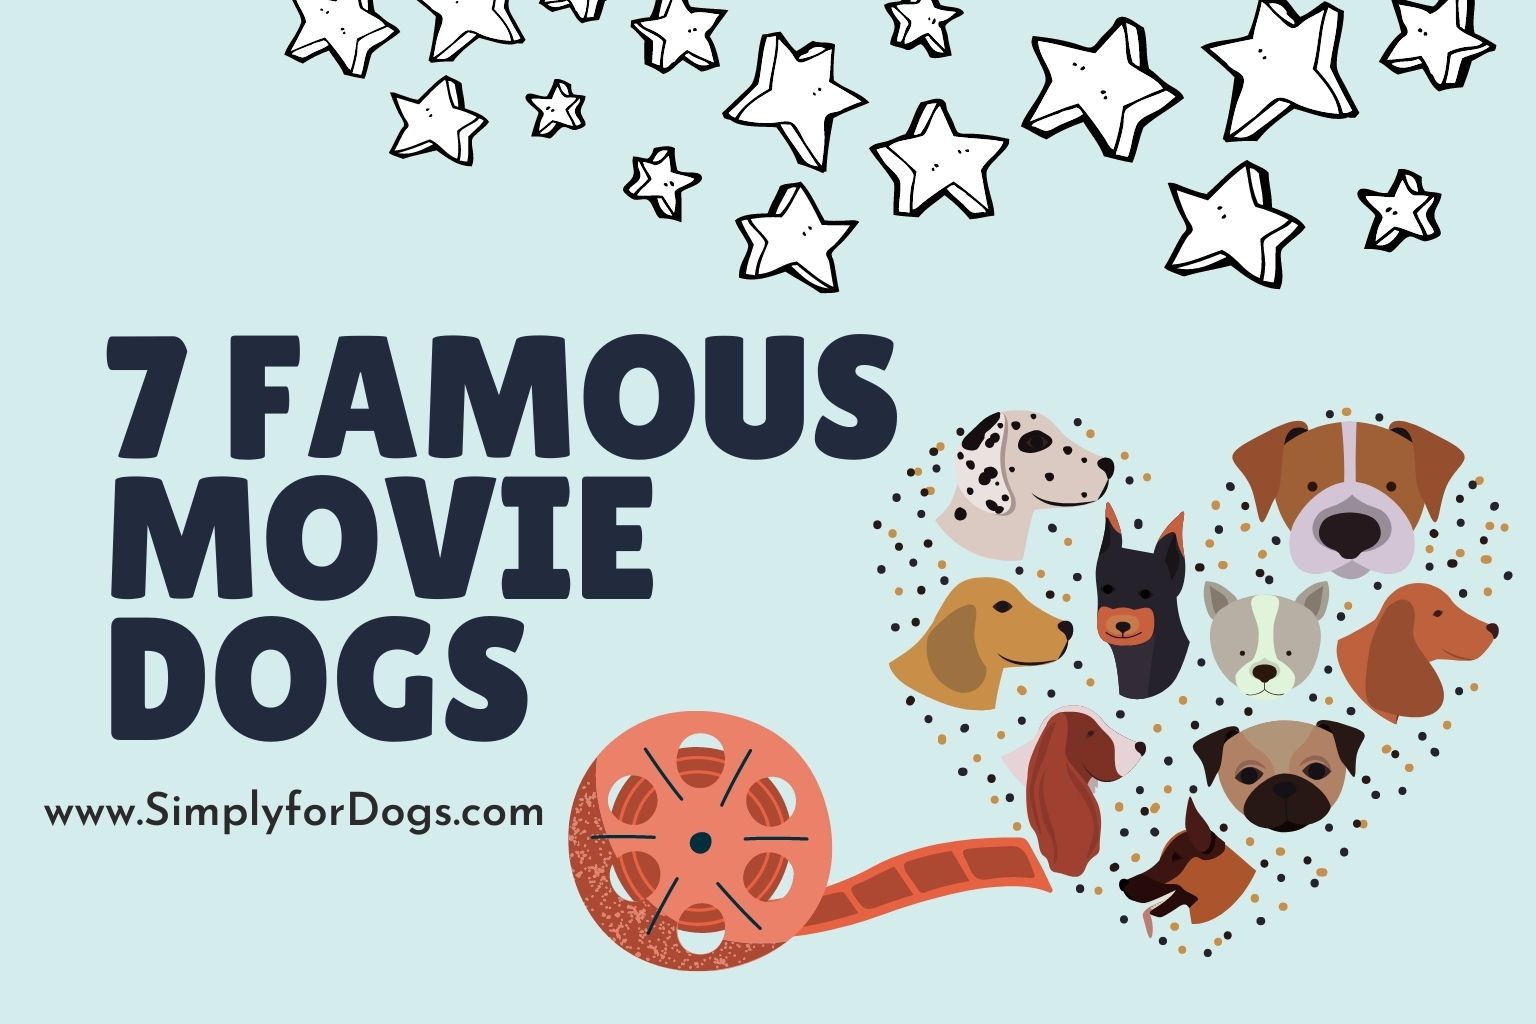 7 famous movie dogs